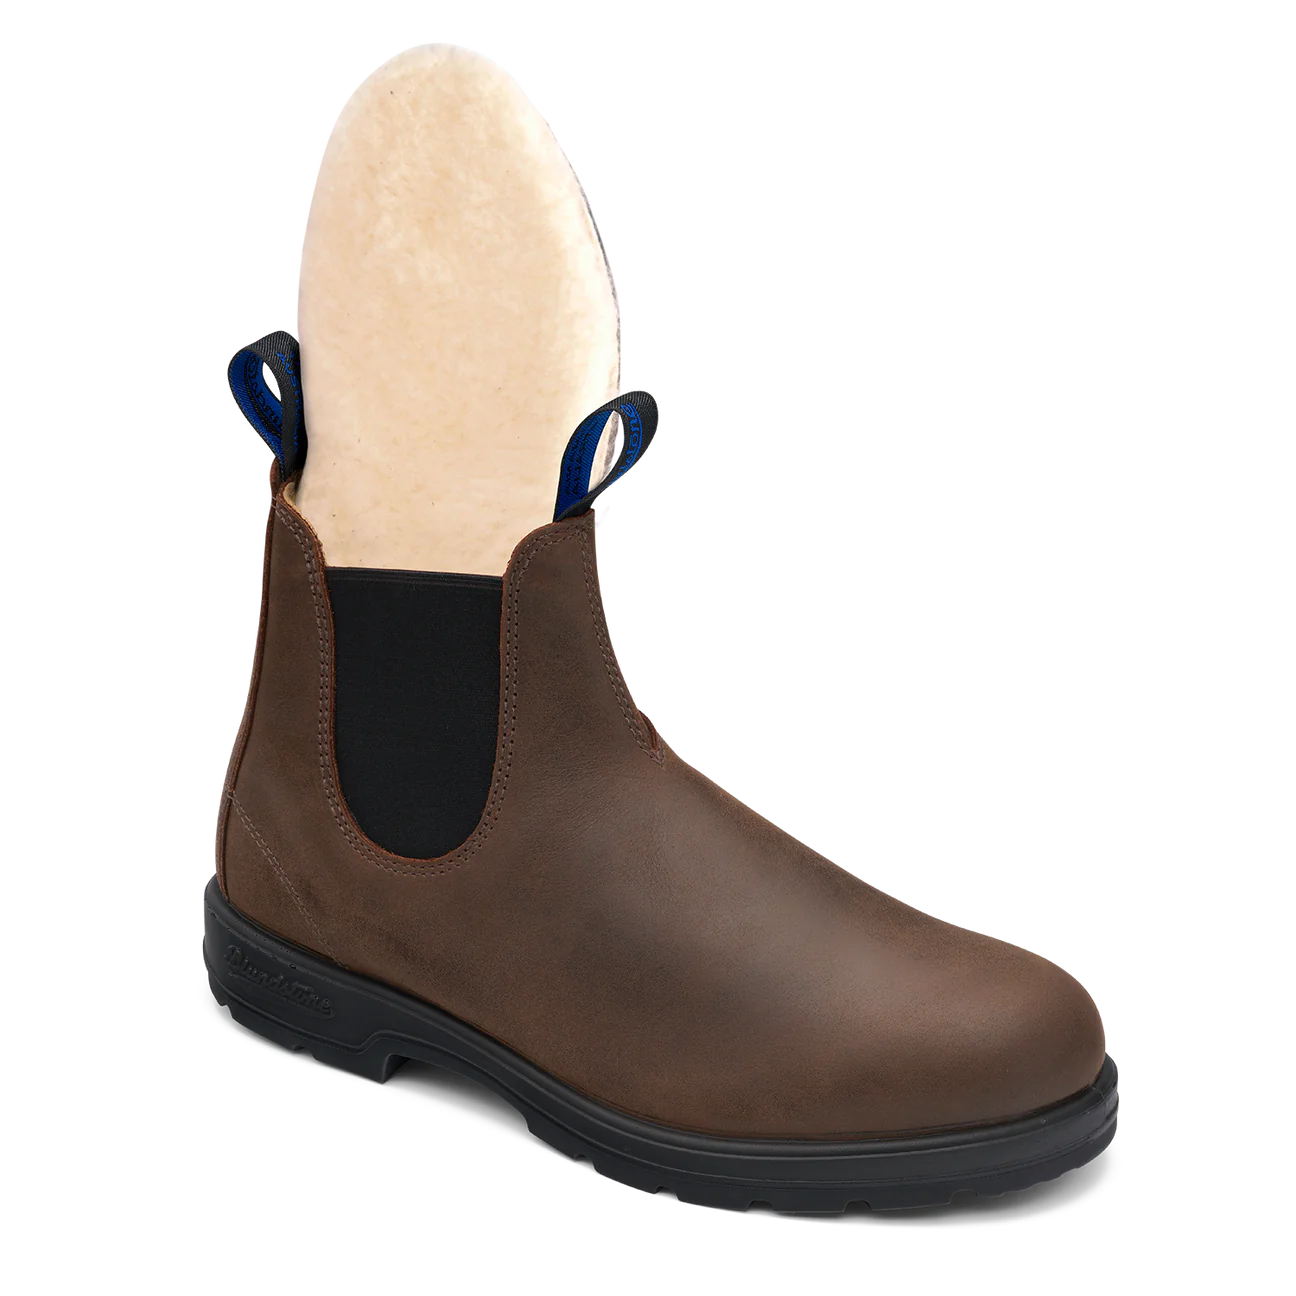 1477 Winter Thermal Classic Boots